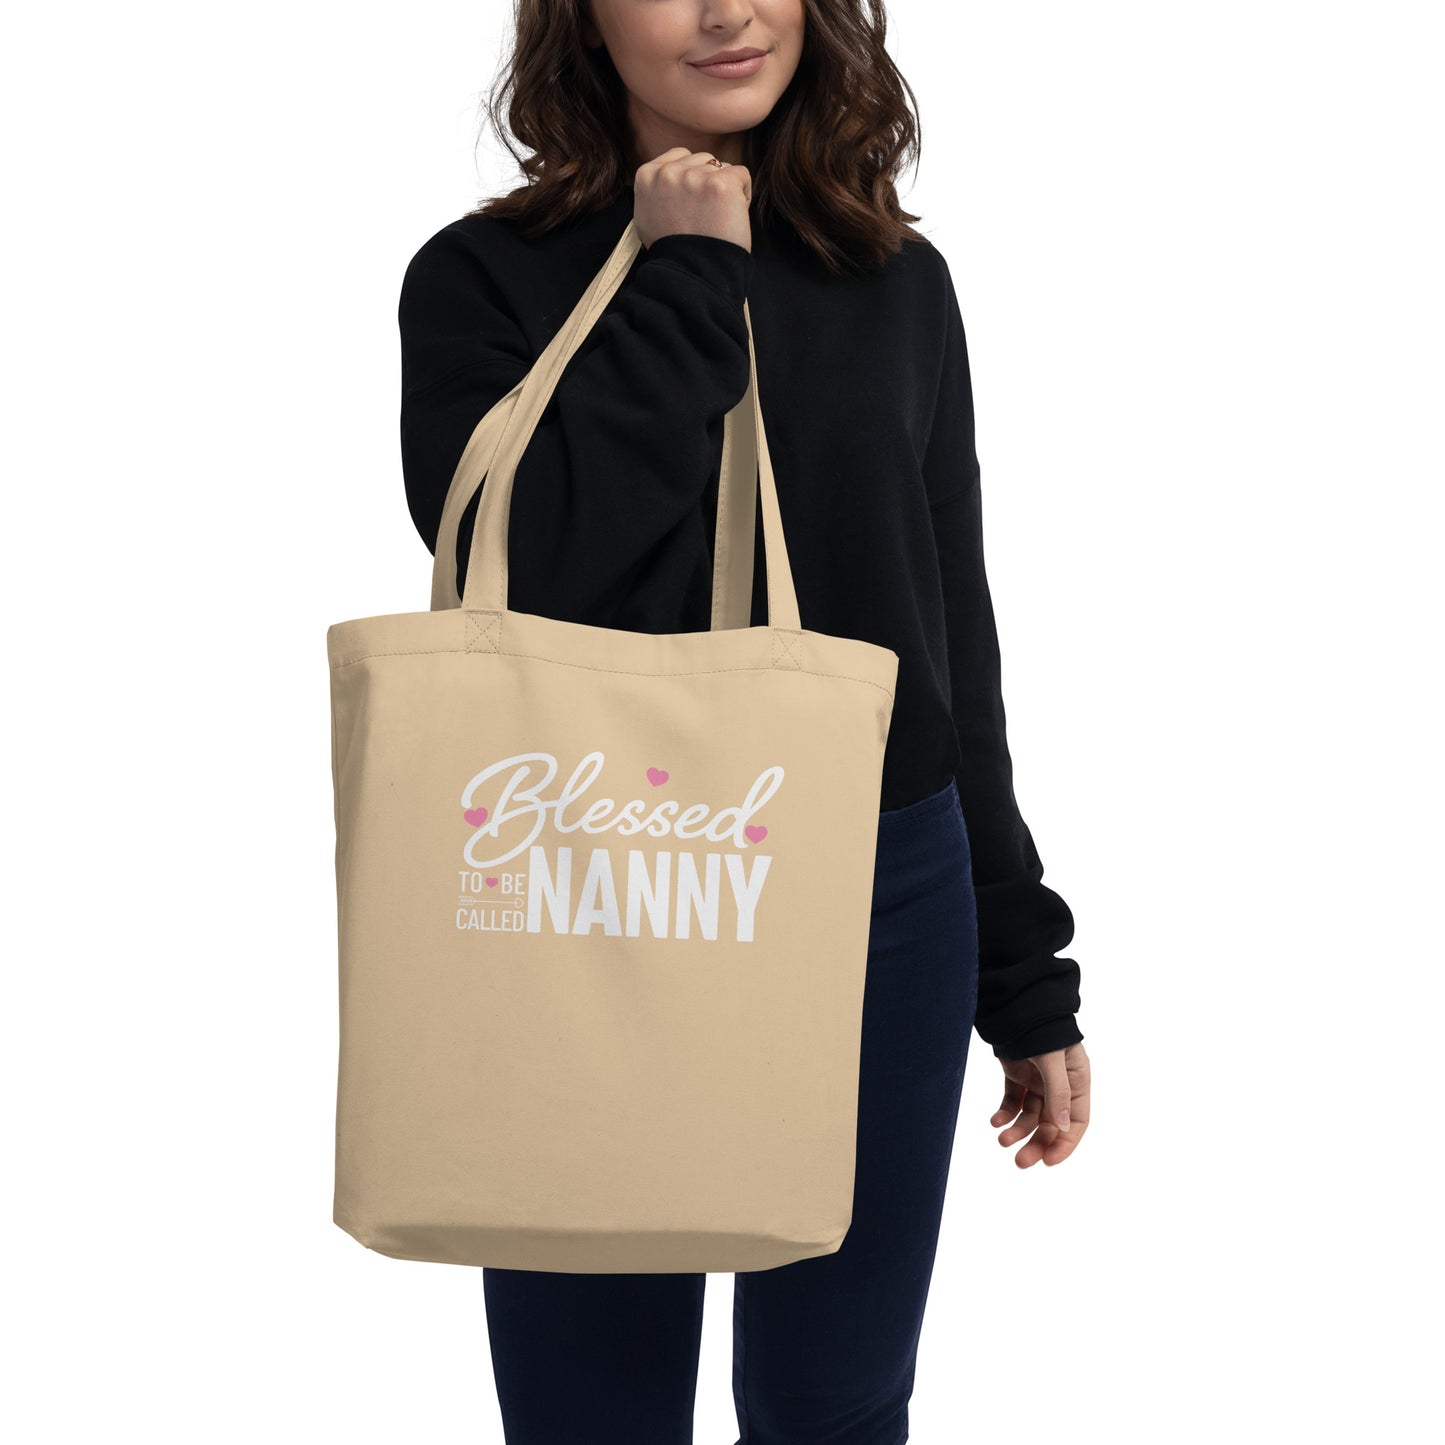 Blessed to be called Nanny Eco Tote Bag